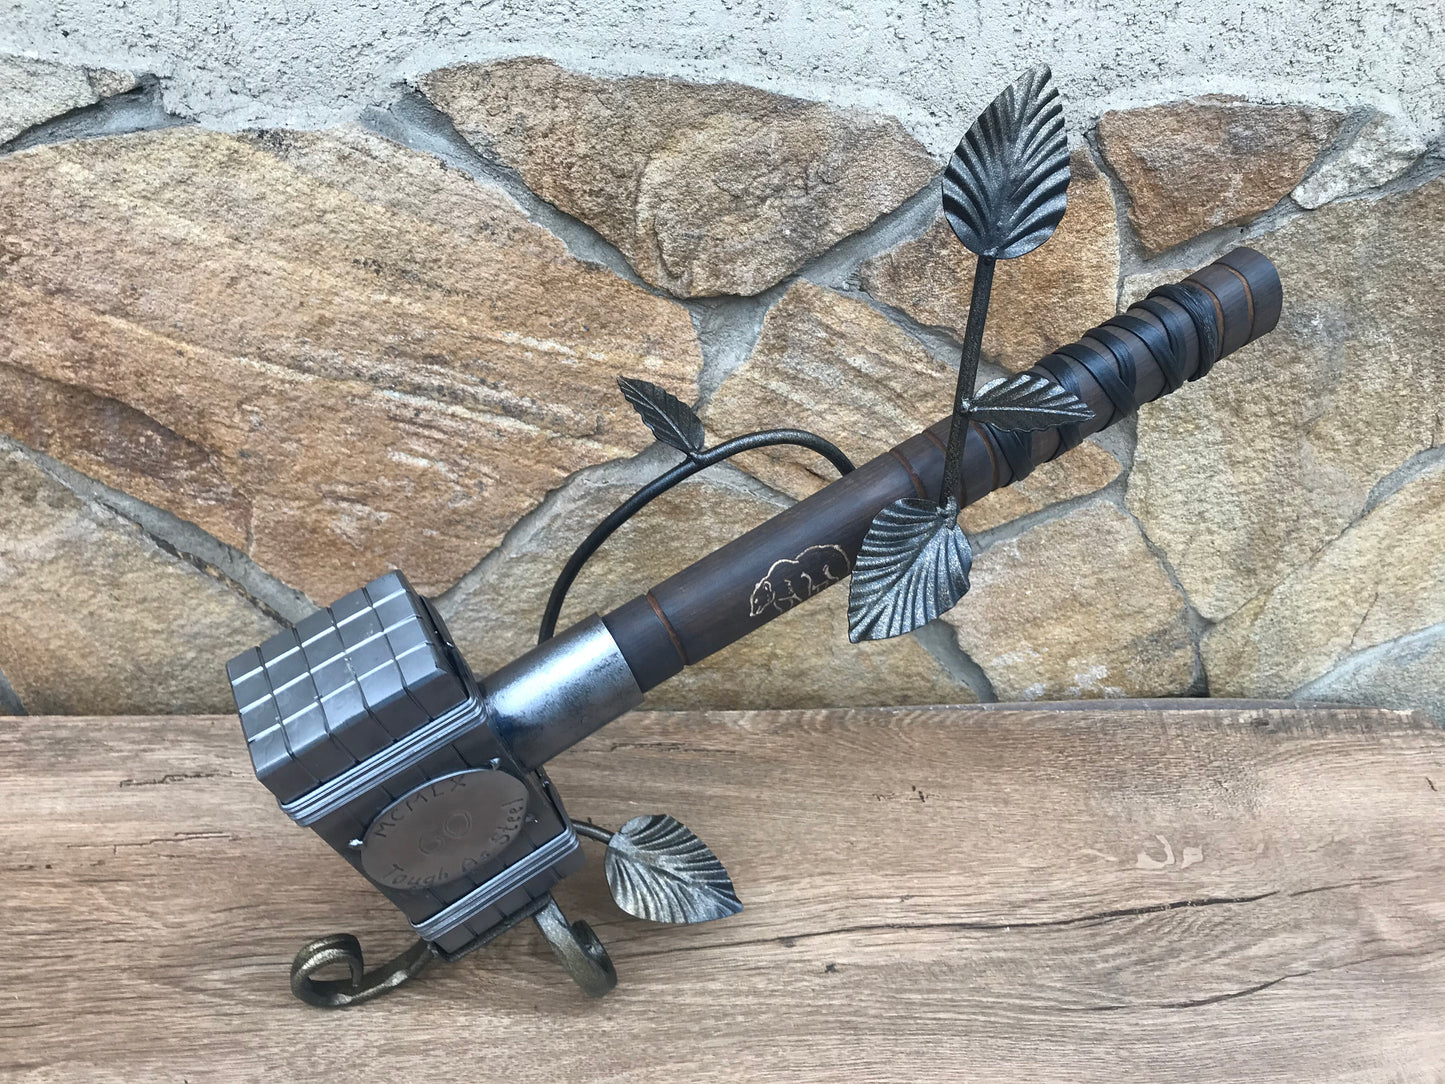 Mens personalized gift, hammer, his birthday gift, war hammer, man personalized gift, viking hammer, personalized man, personalized men, axe